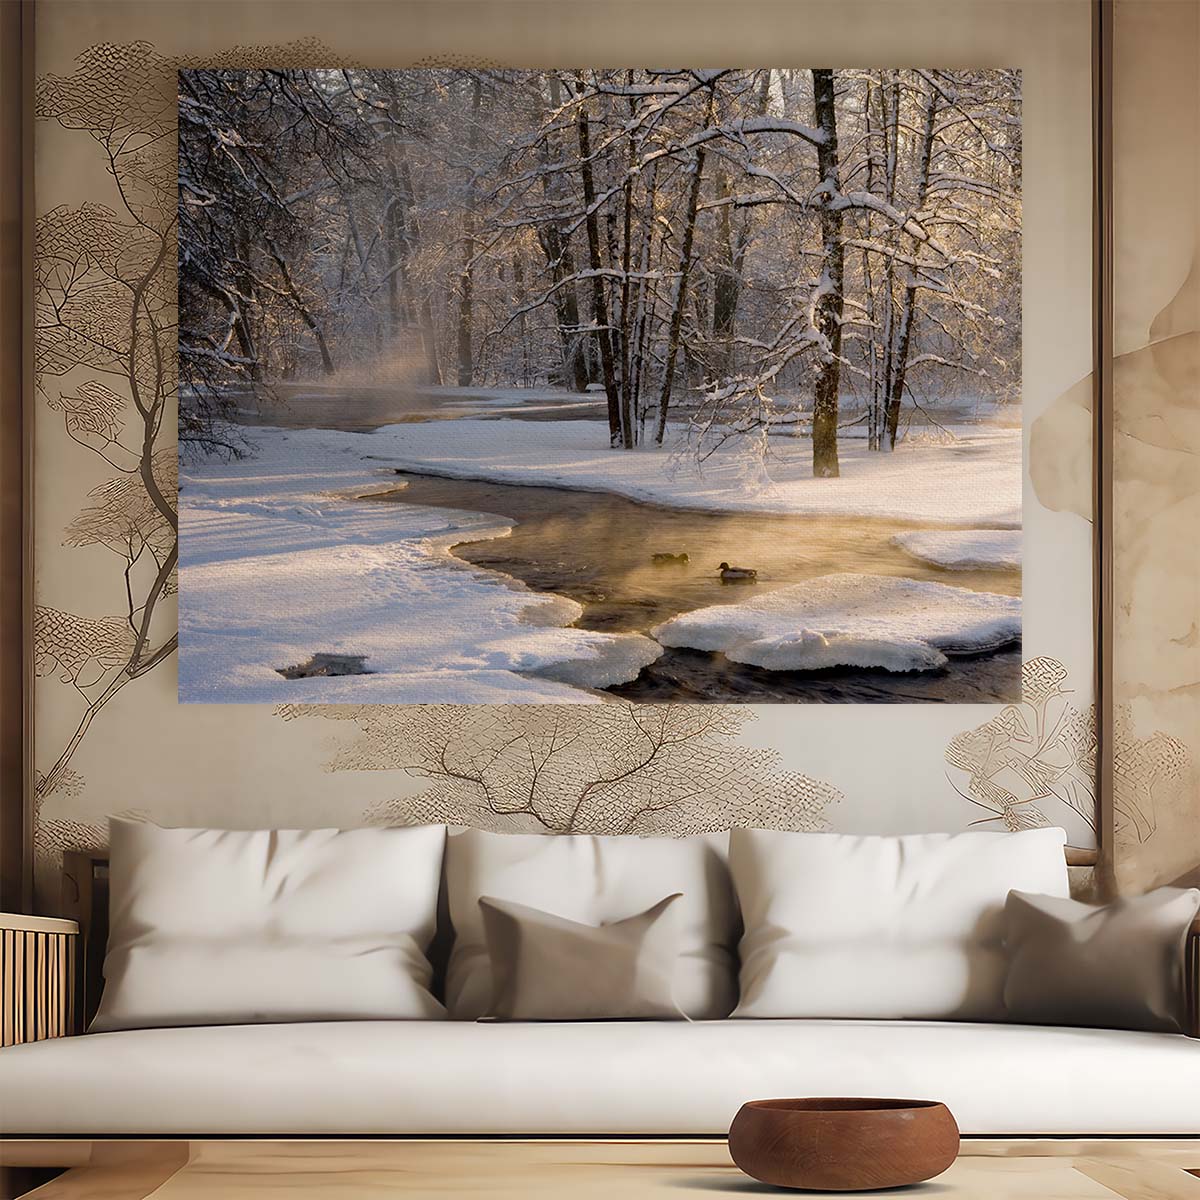 Sunrise Over Snowy Swedish Forest Landscape Wall Art by Luxuriance Designs. Made in USA.